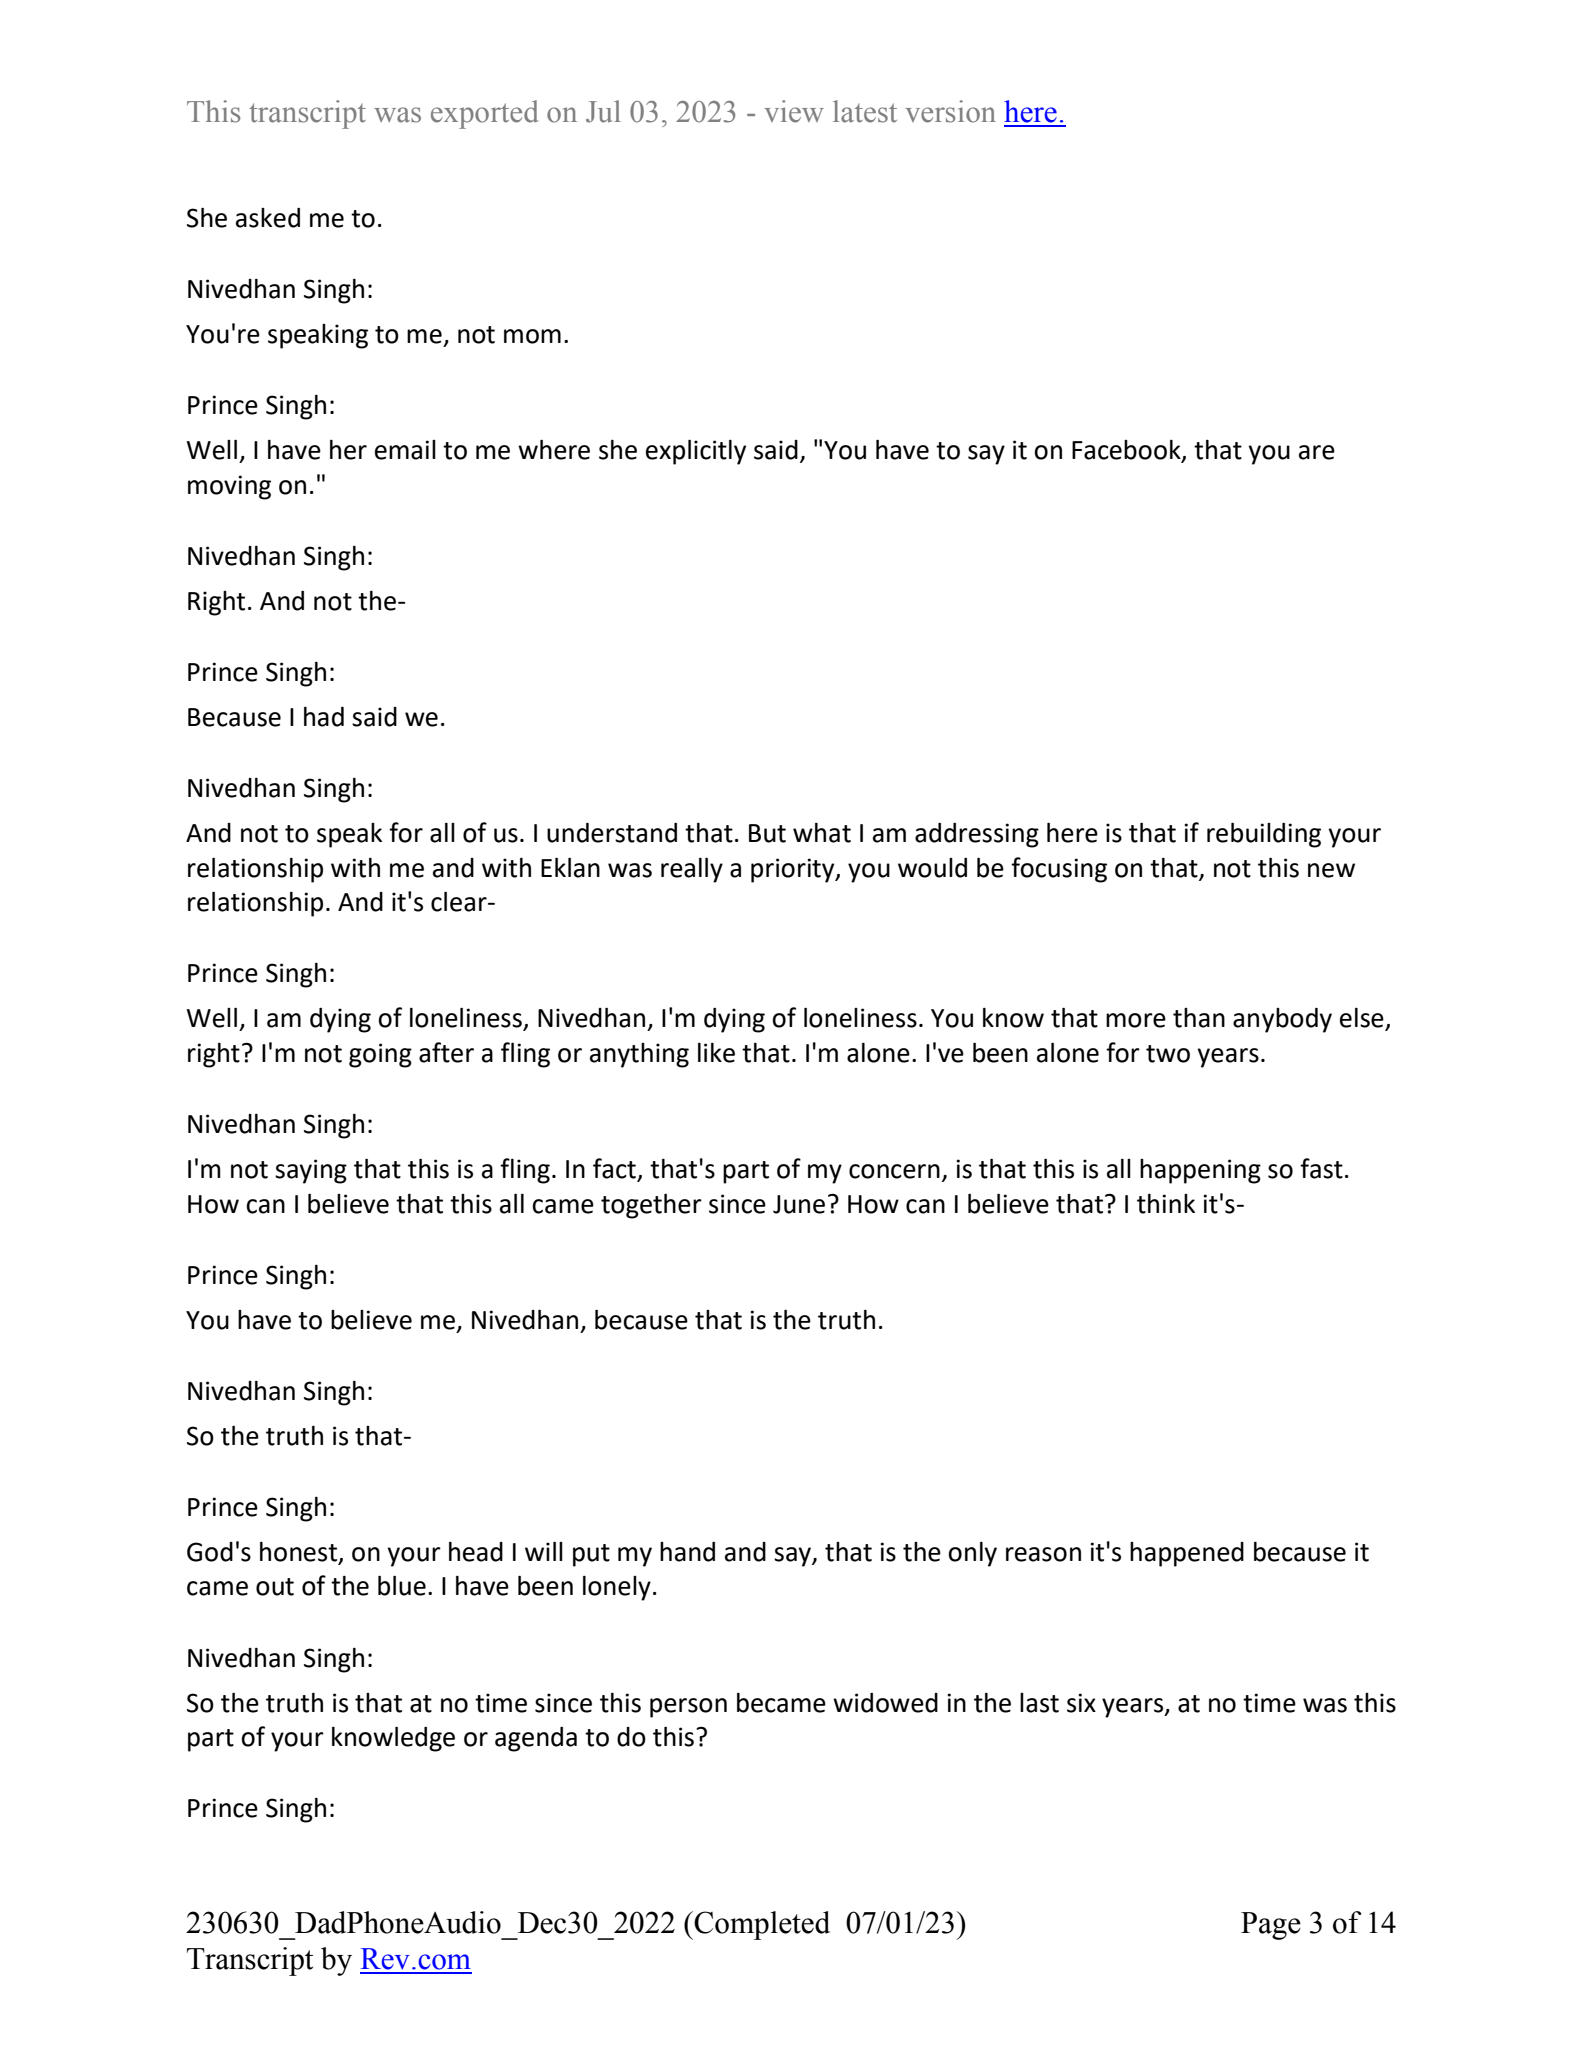 December 30th, 2022 phone call transcript - Page 3